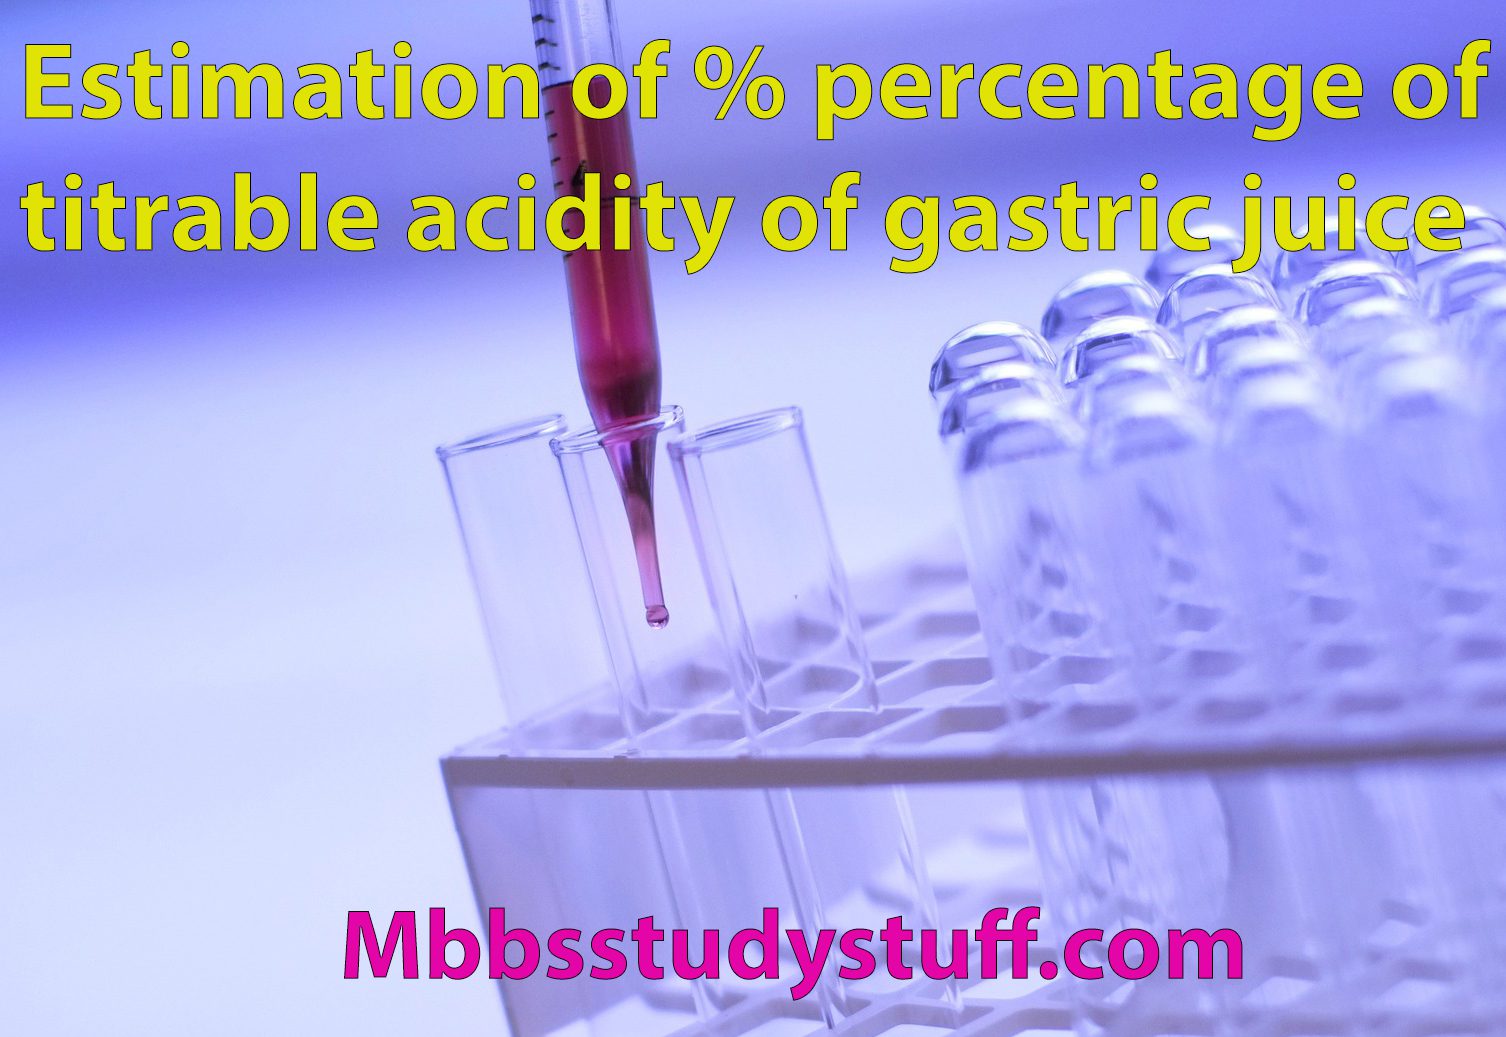 Estimation of % percentage of titrable acidity of Gastric juice